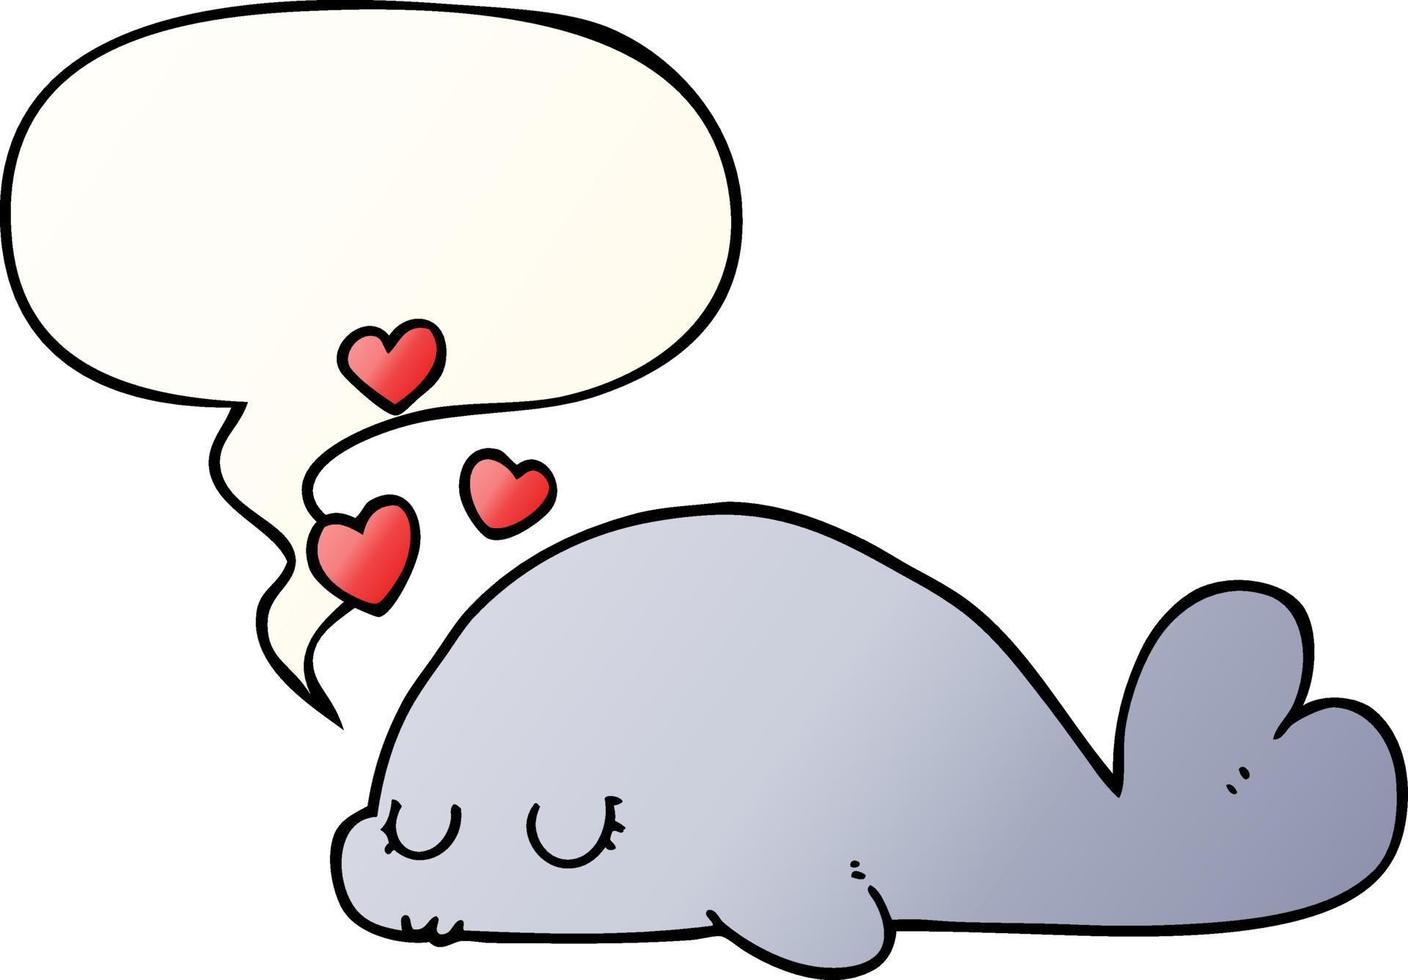 cute cartoon dolphin and speech bubble in smooth gradient style vector